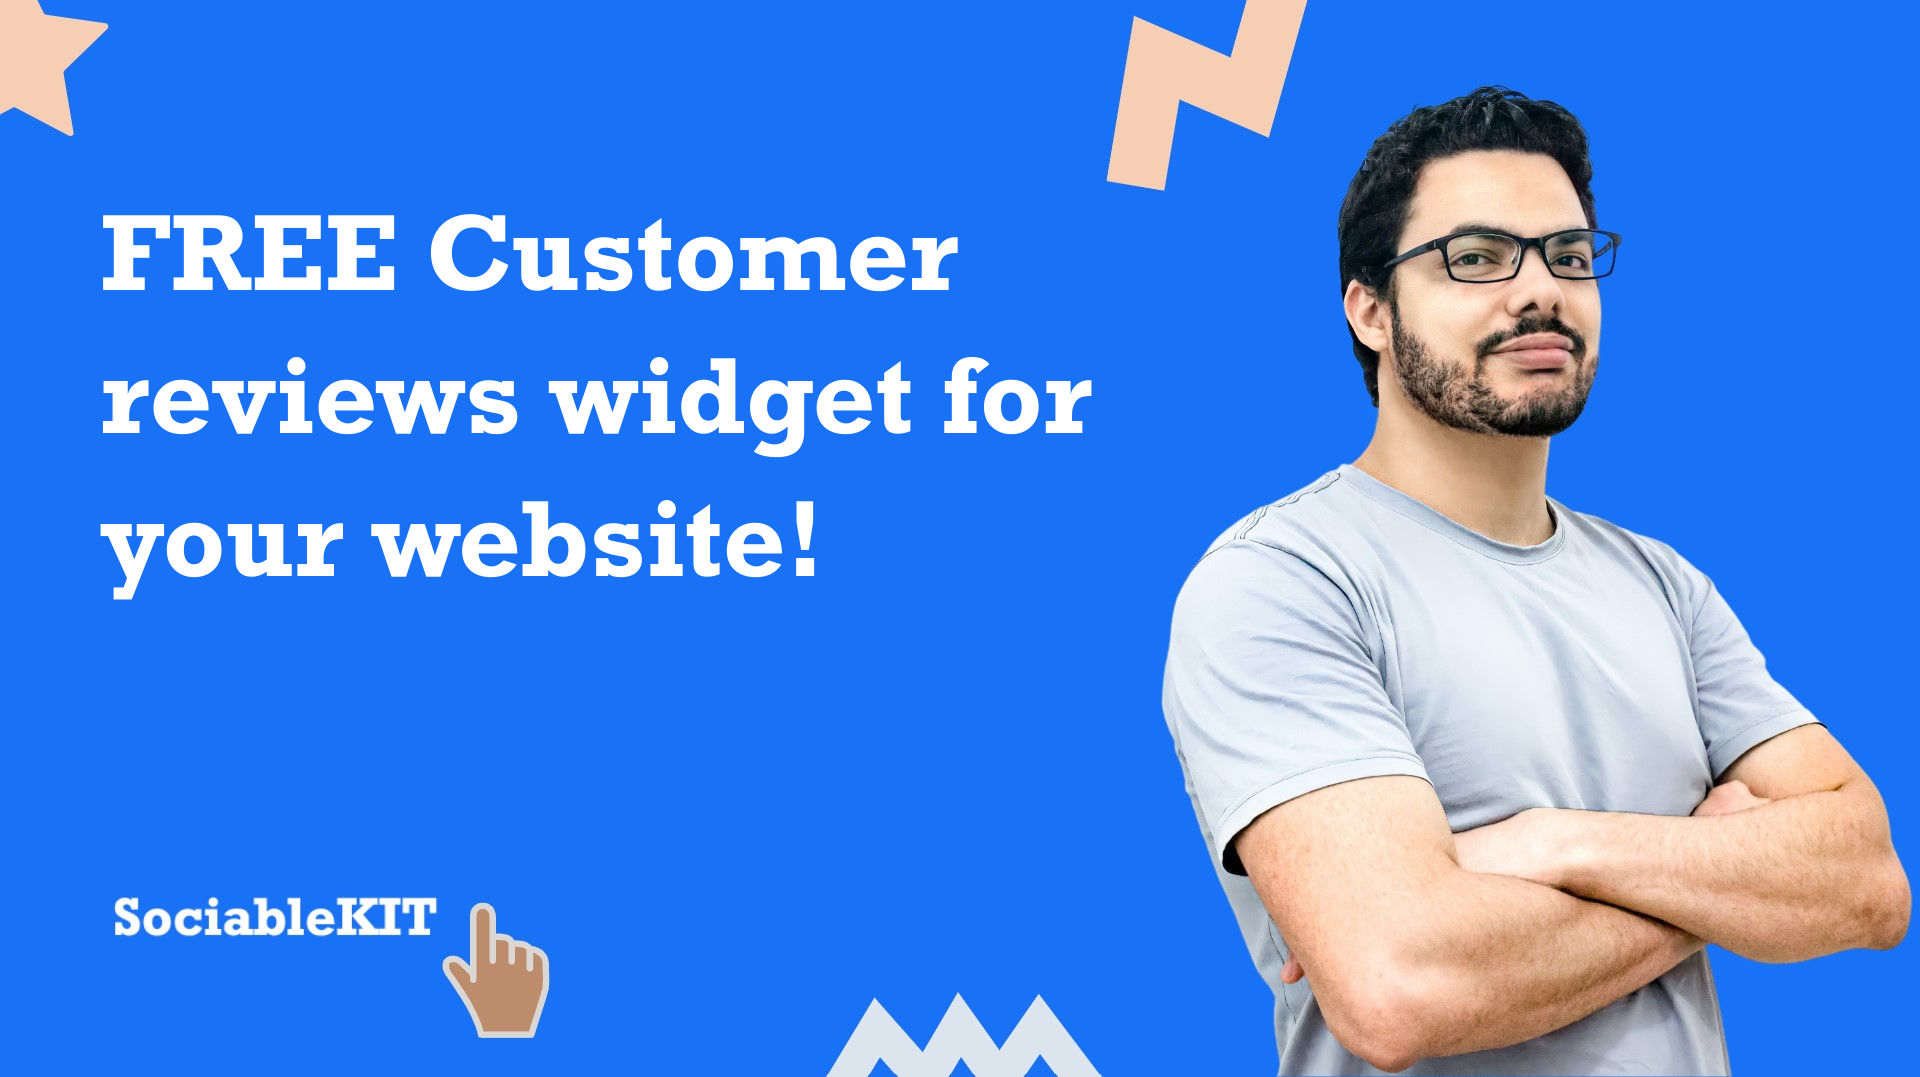 Free Customer reviews widget for your website